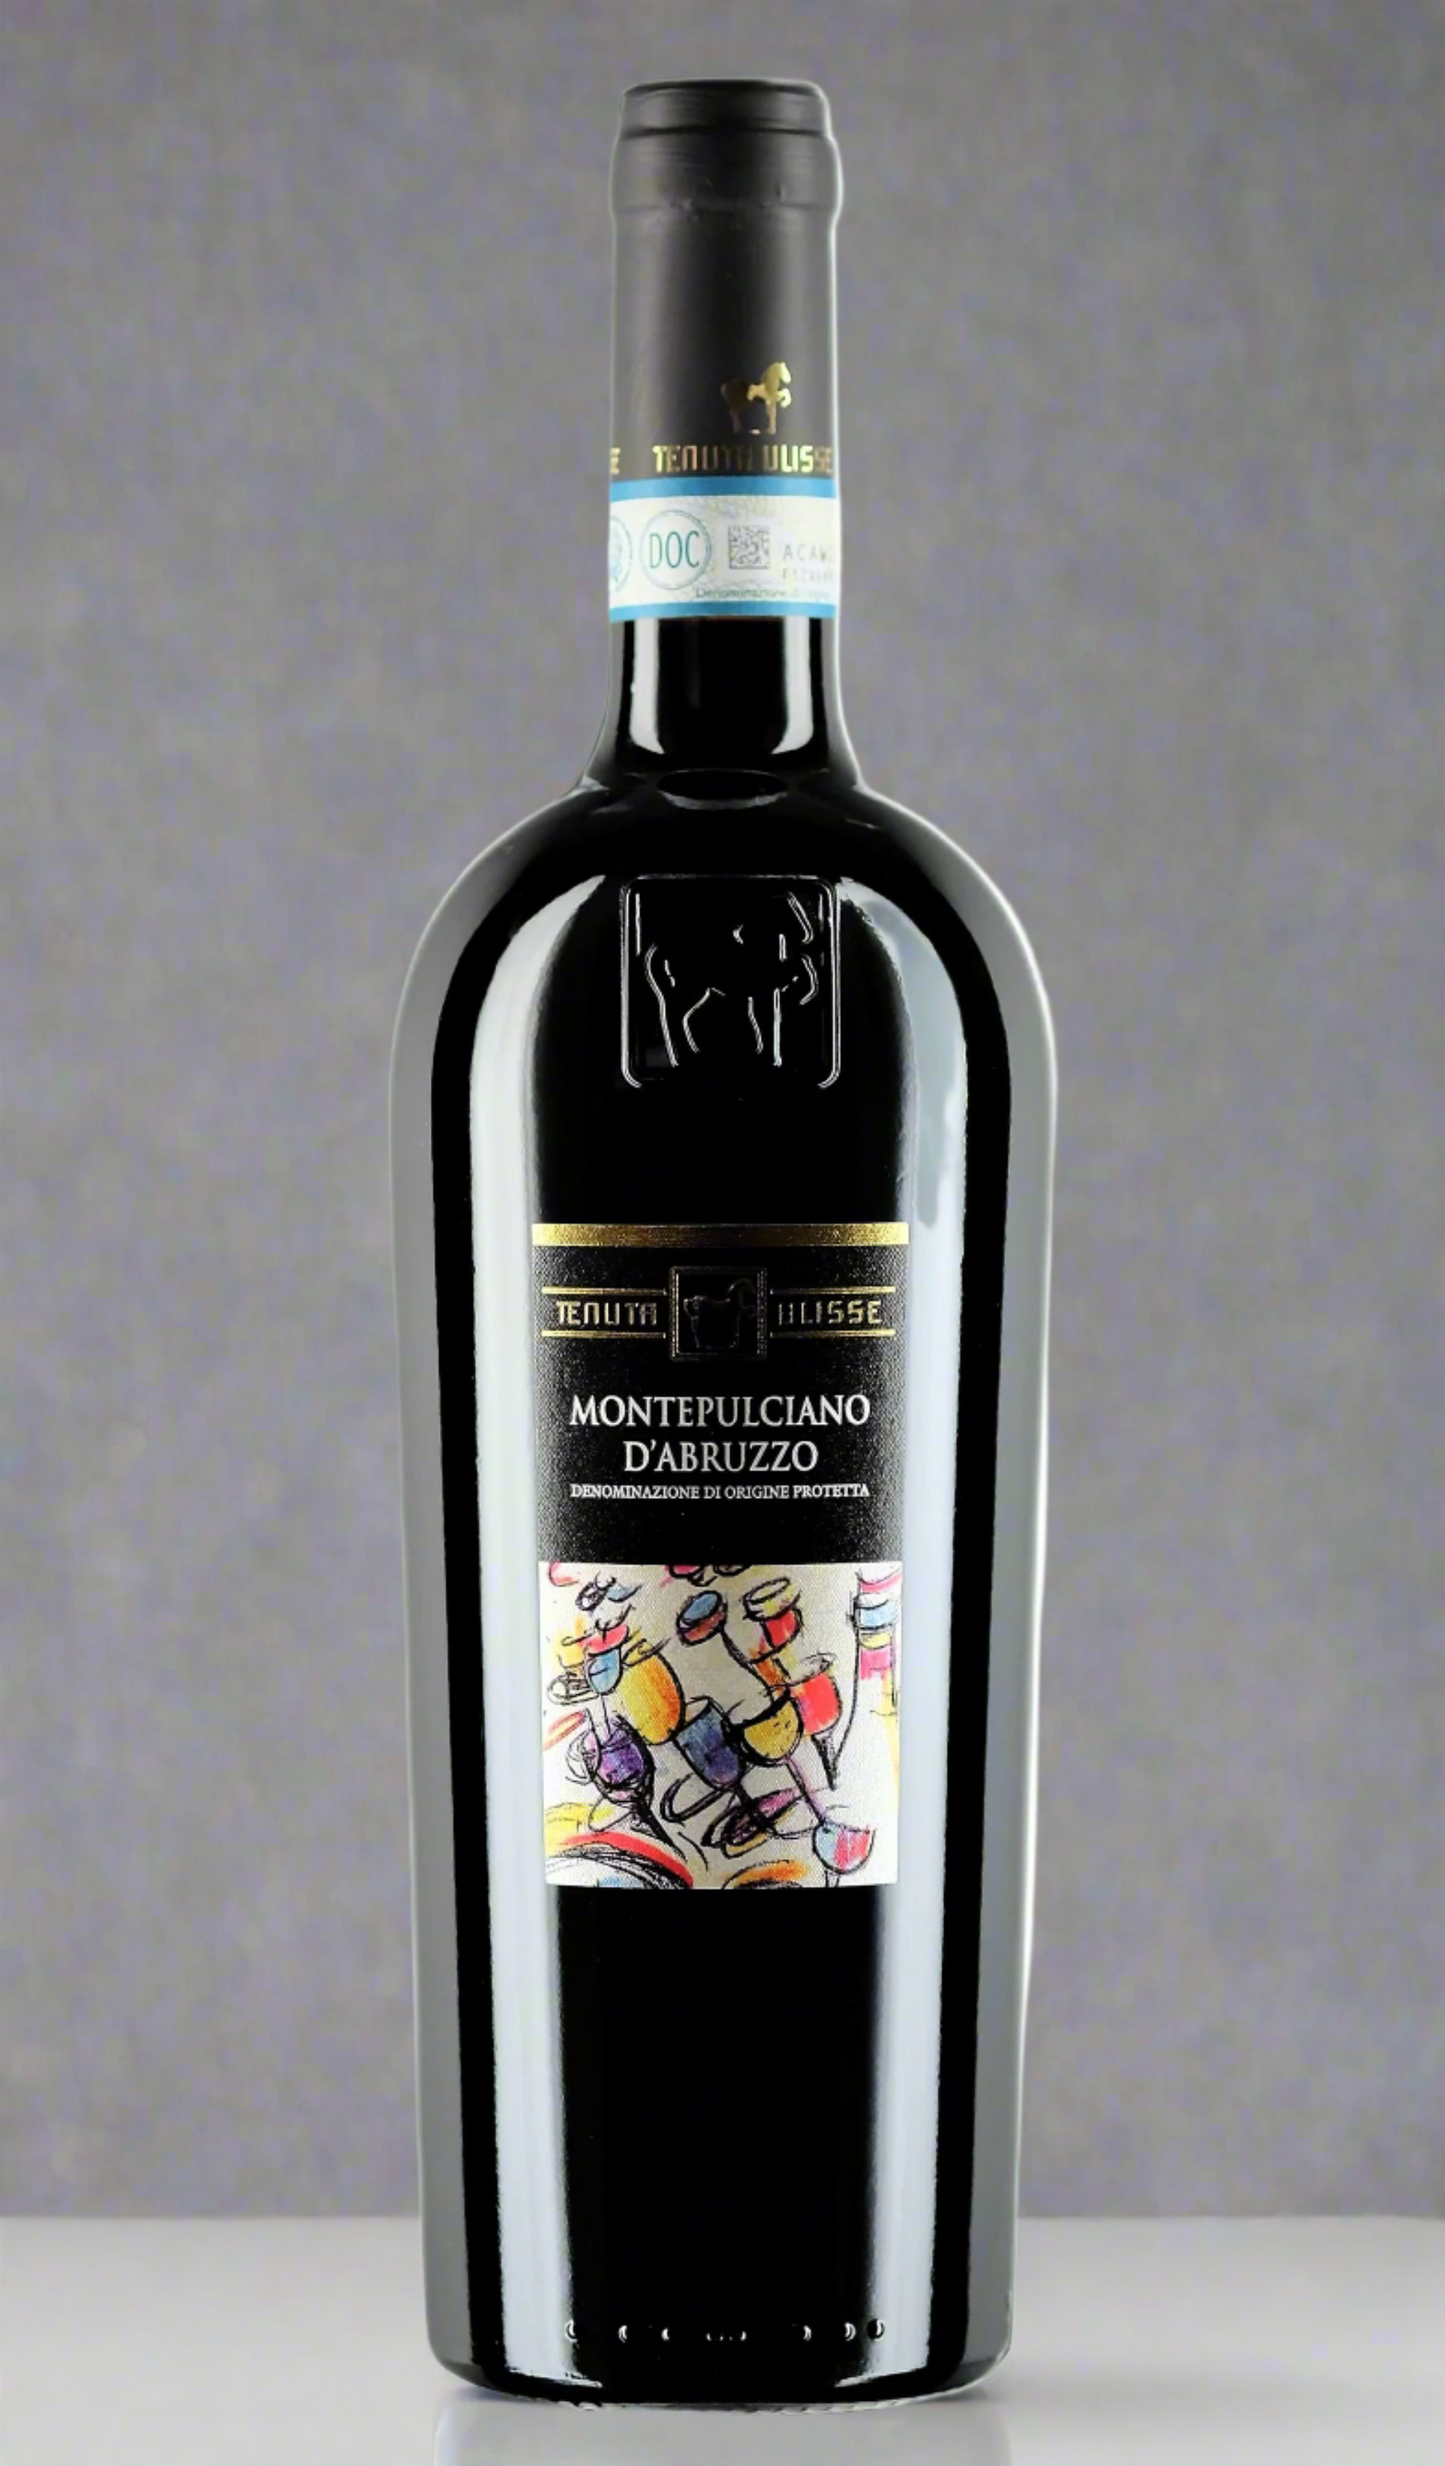 Find out more, explore the range and purchase Tenuta Ulisse Montepulciano D'Abruzzo 2022 available online at Wine Sellers Direct - Australia's independent liquor specialists.